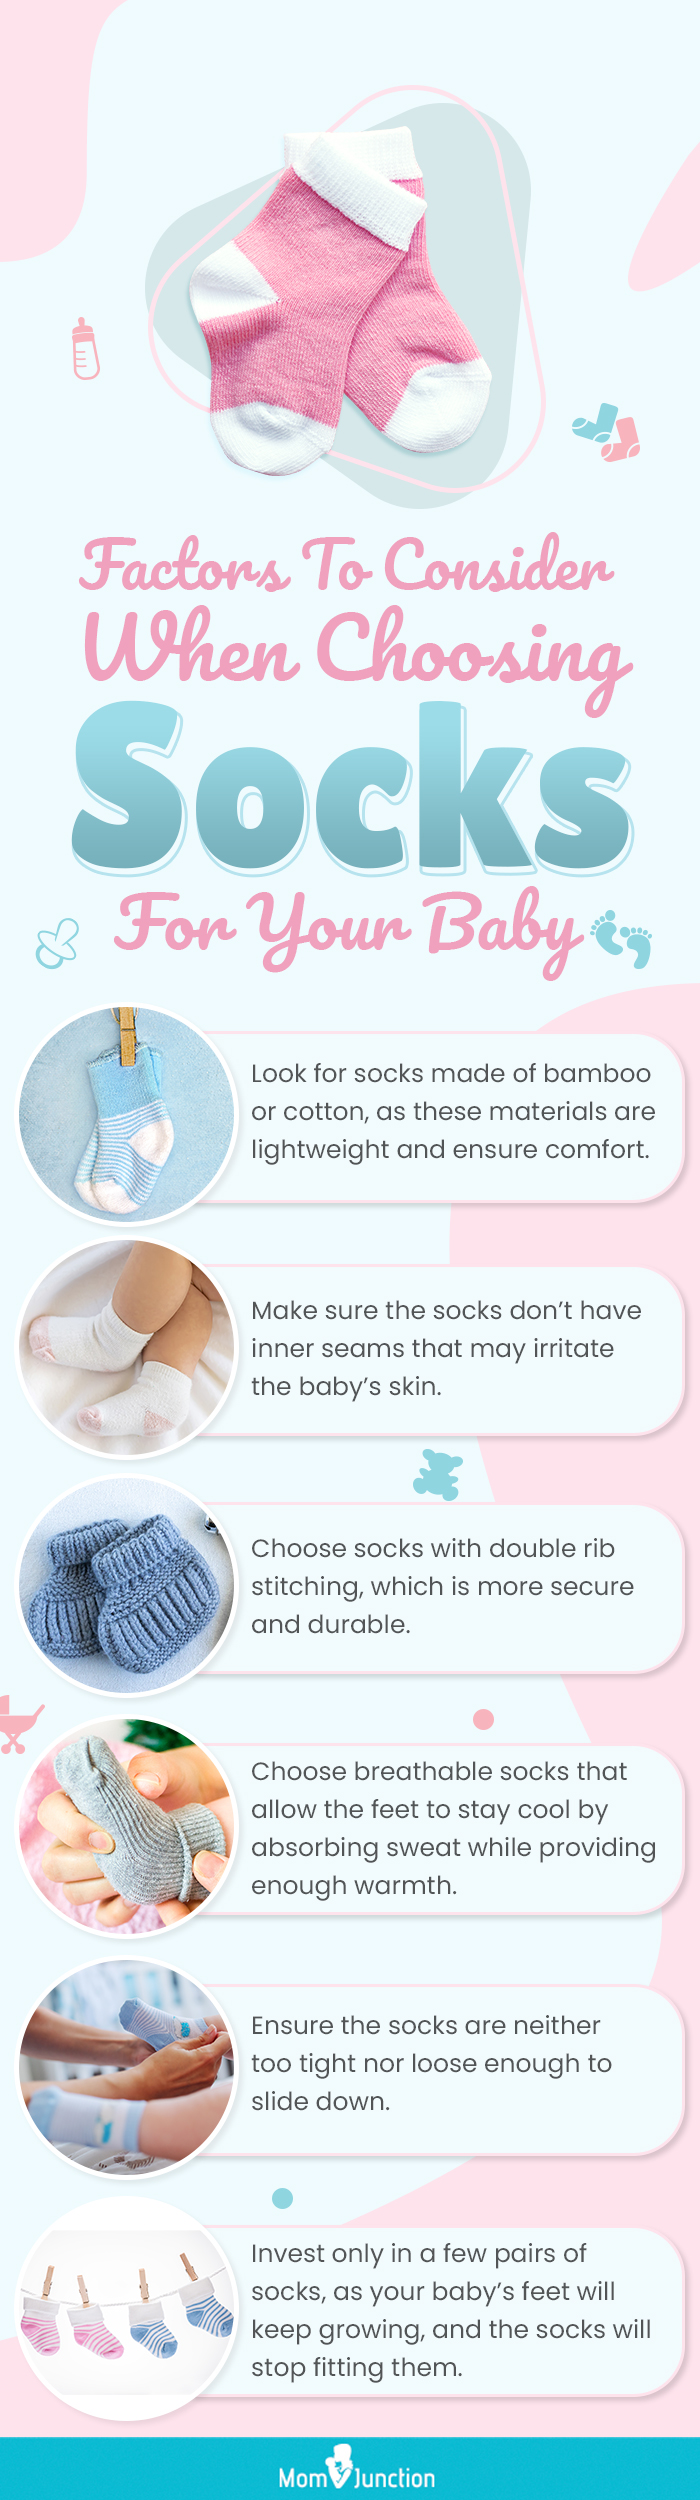 Factors To Consider When Choosing Socks For Your Baby (infographic)